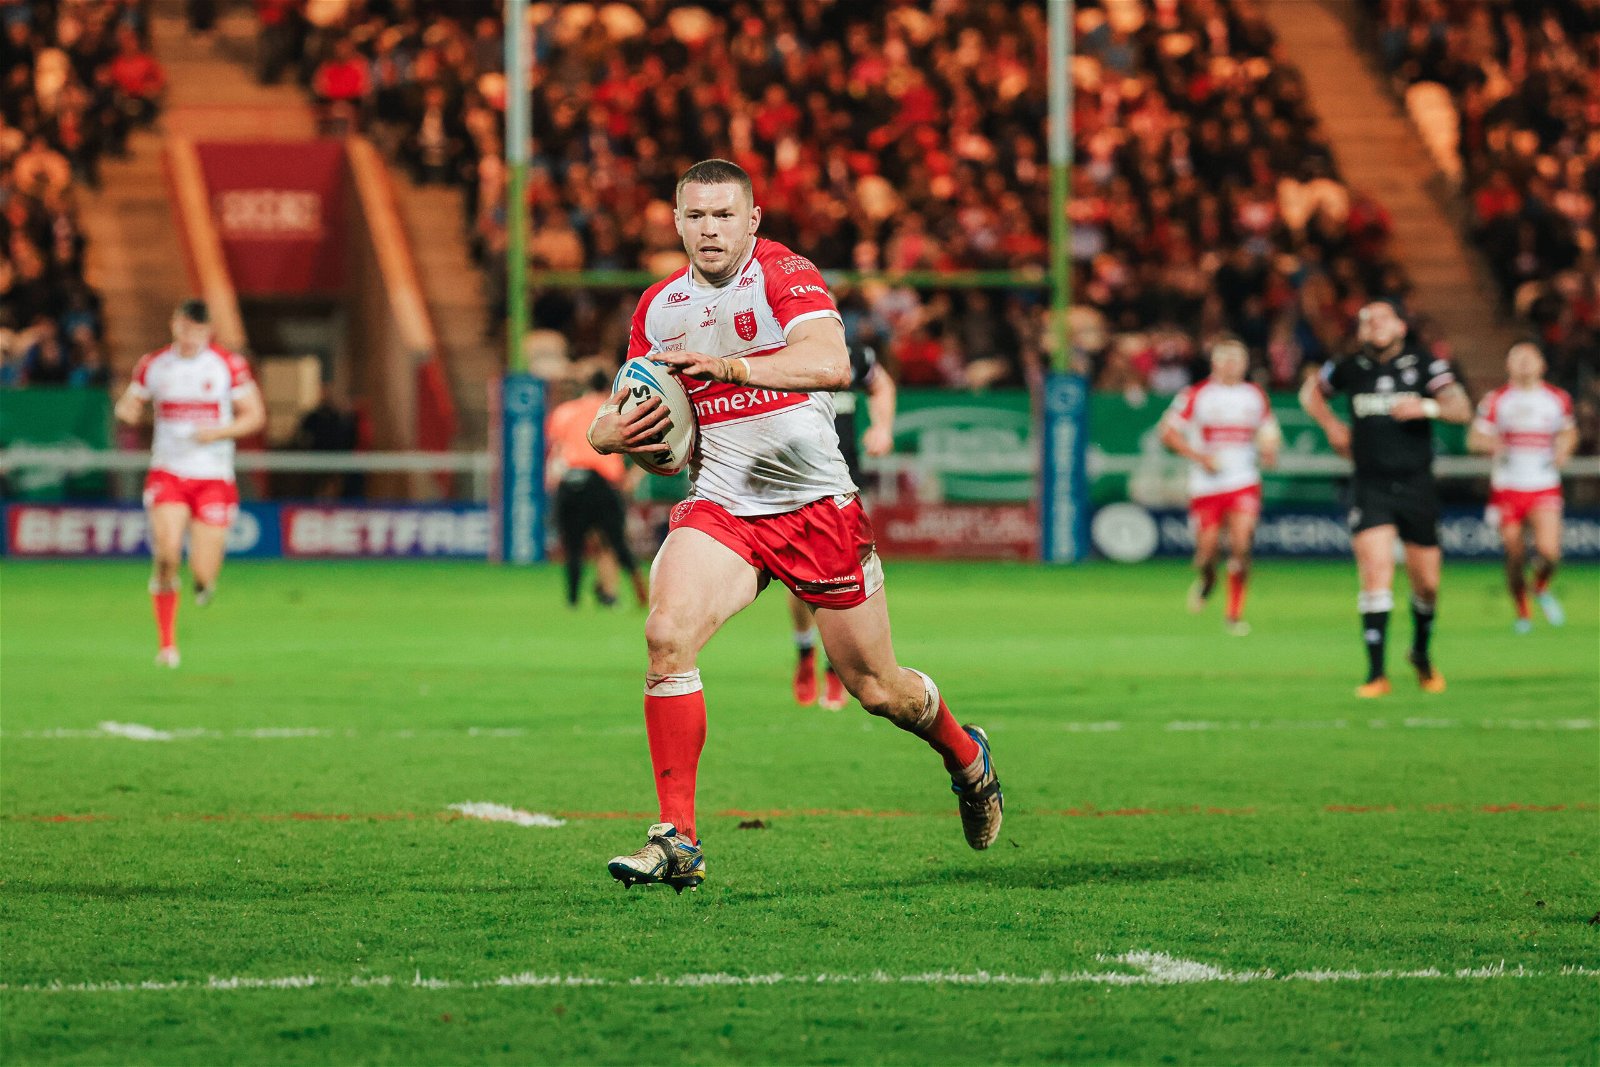 James Batchelor of Hull KR runs in for a try.